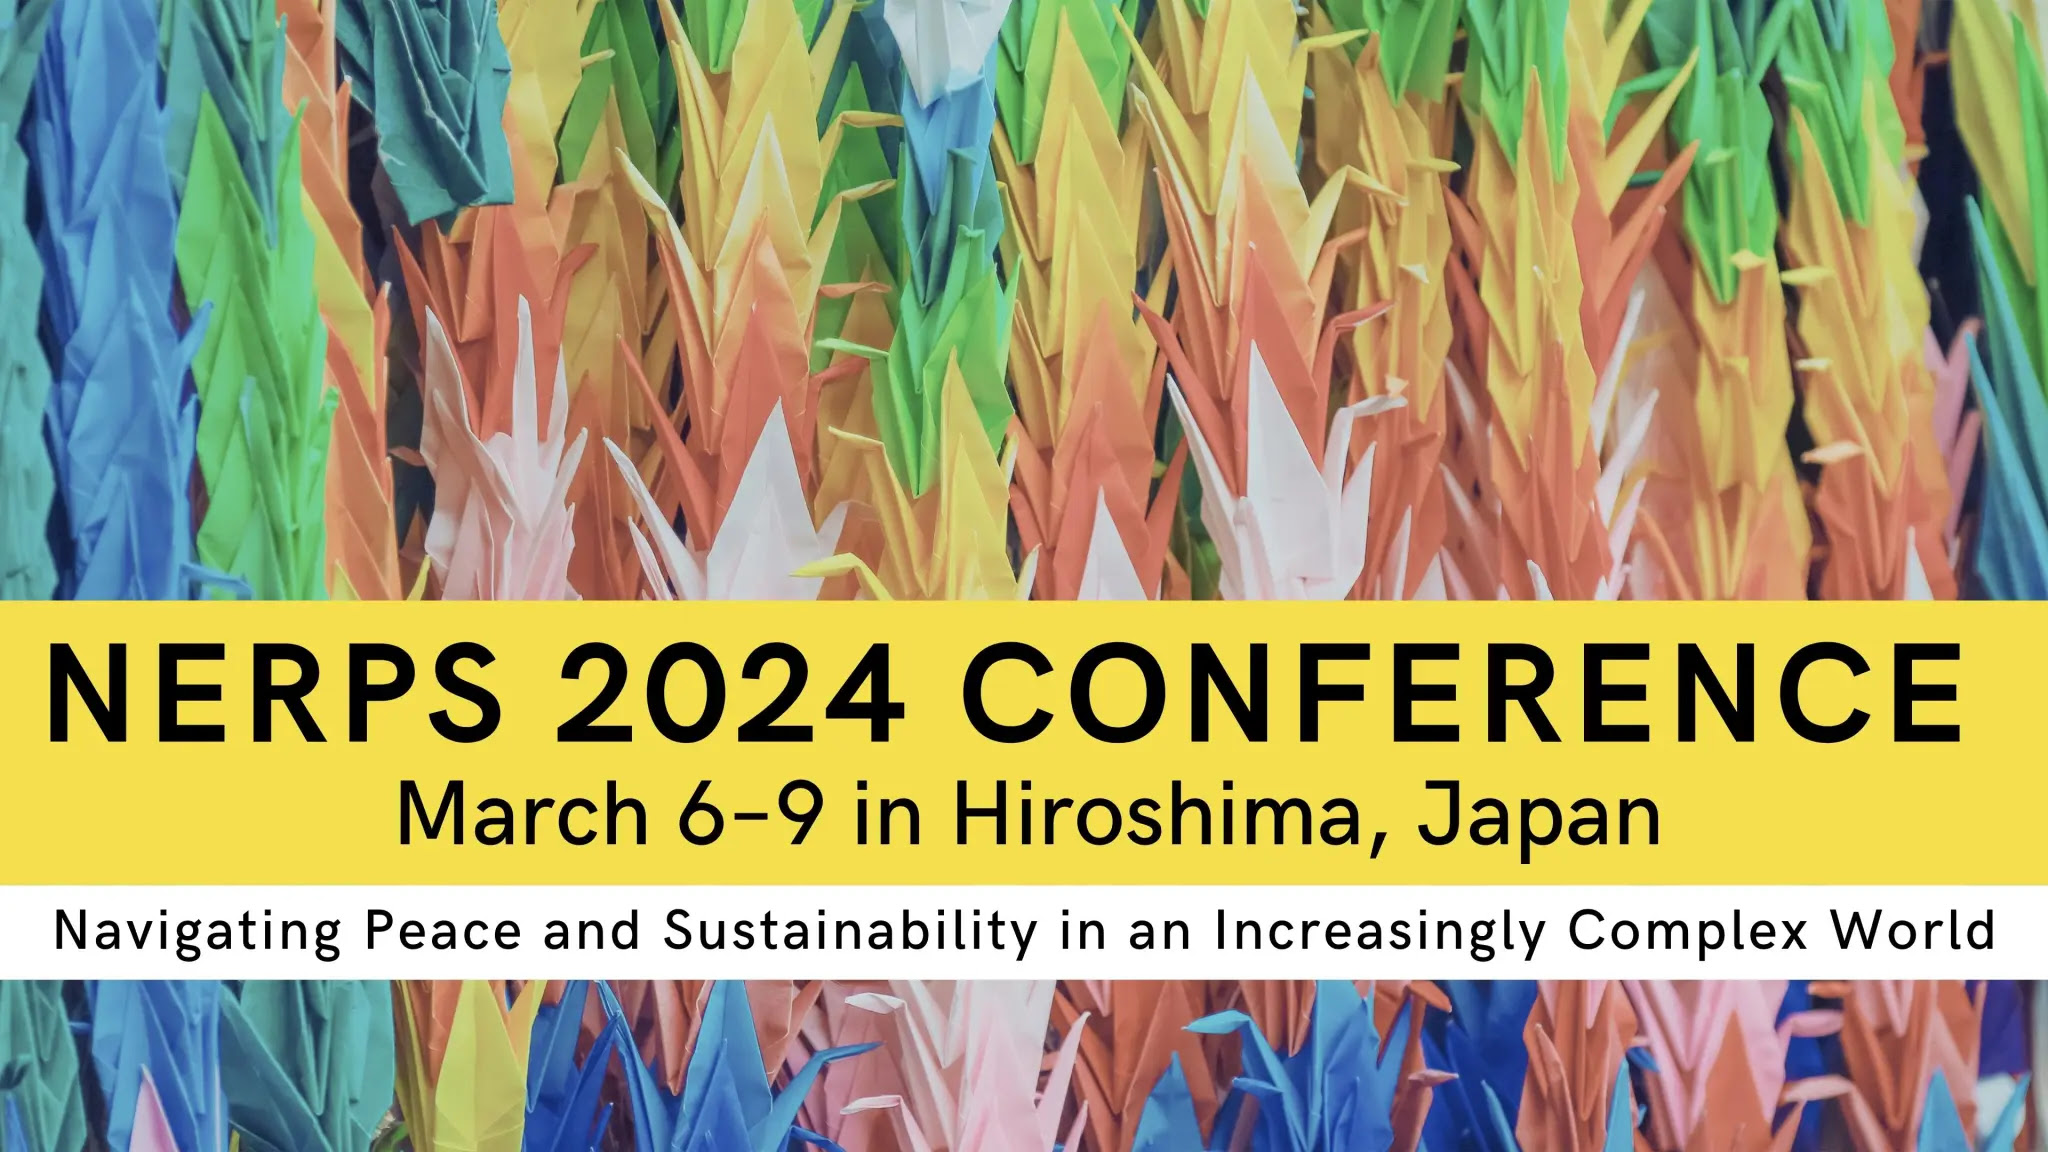 NERPS 2024 CONFERENCE